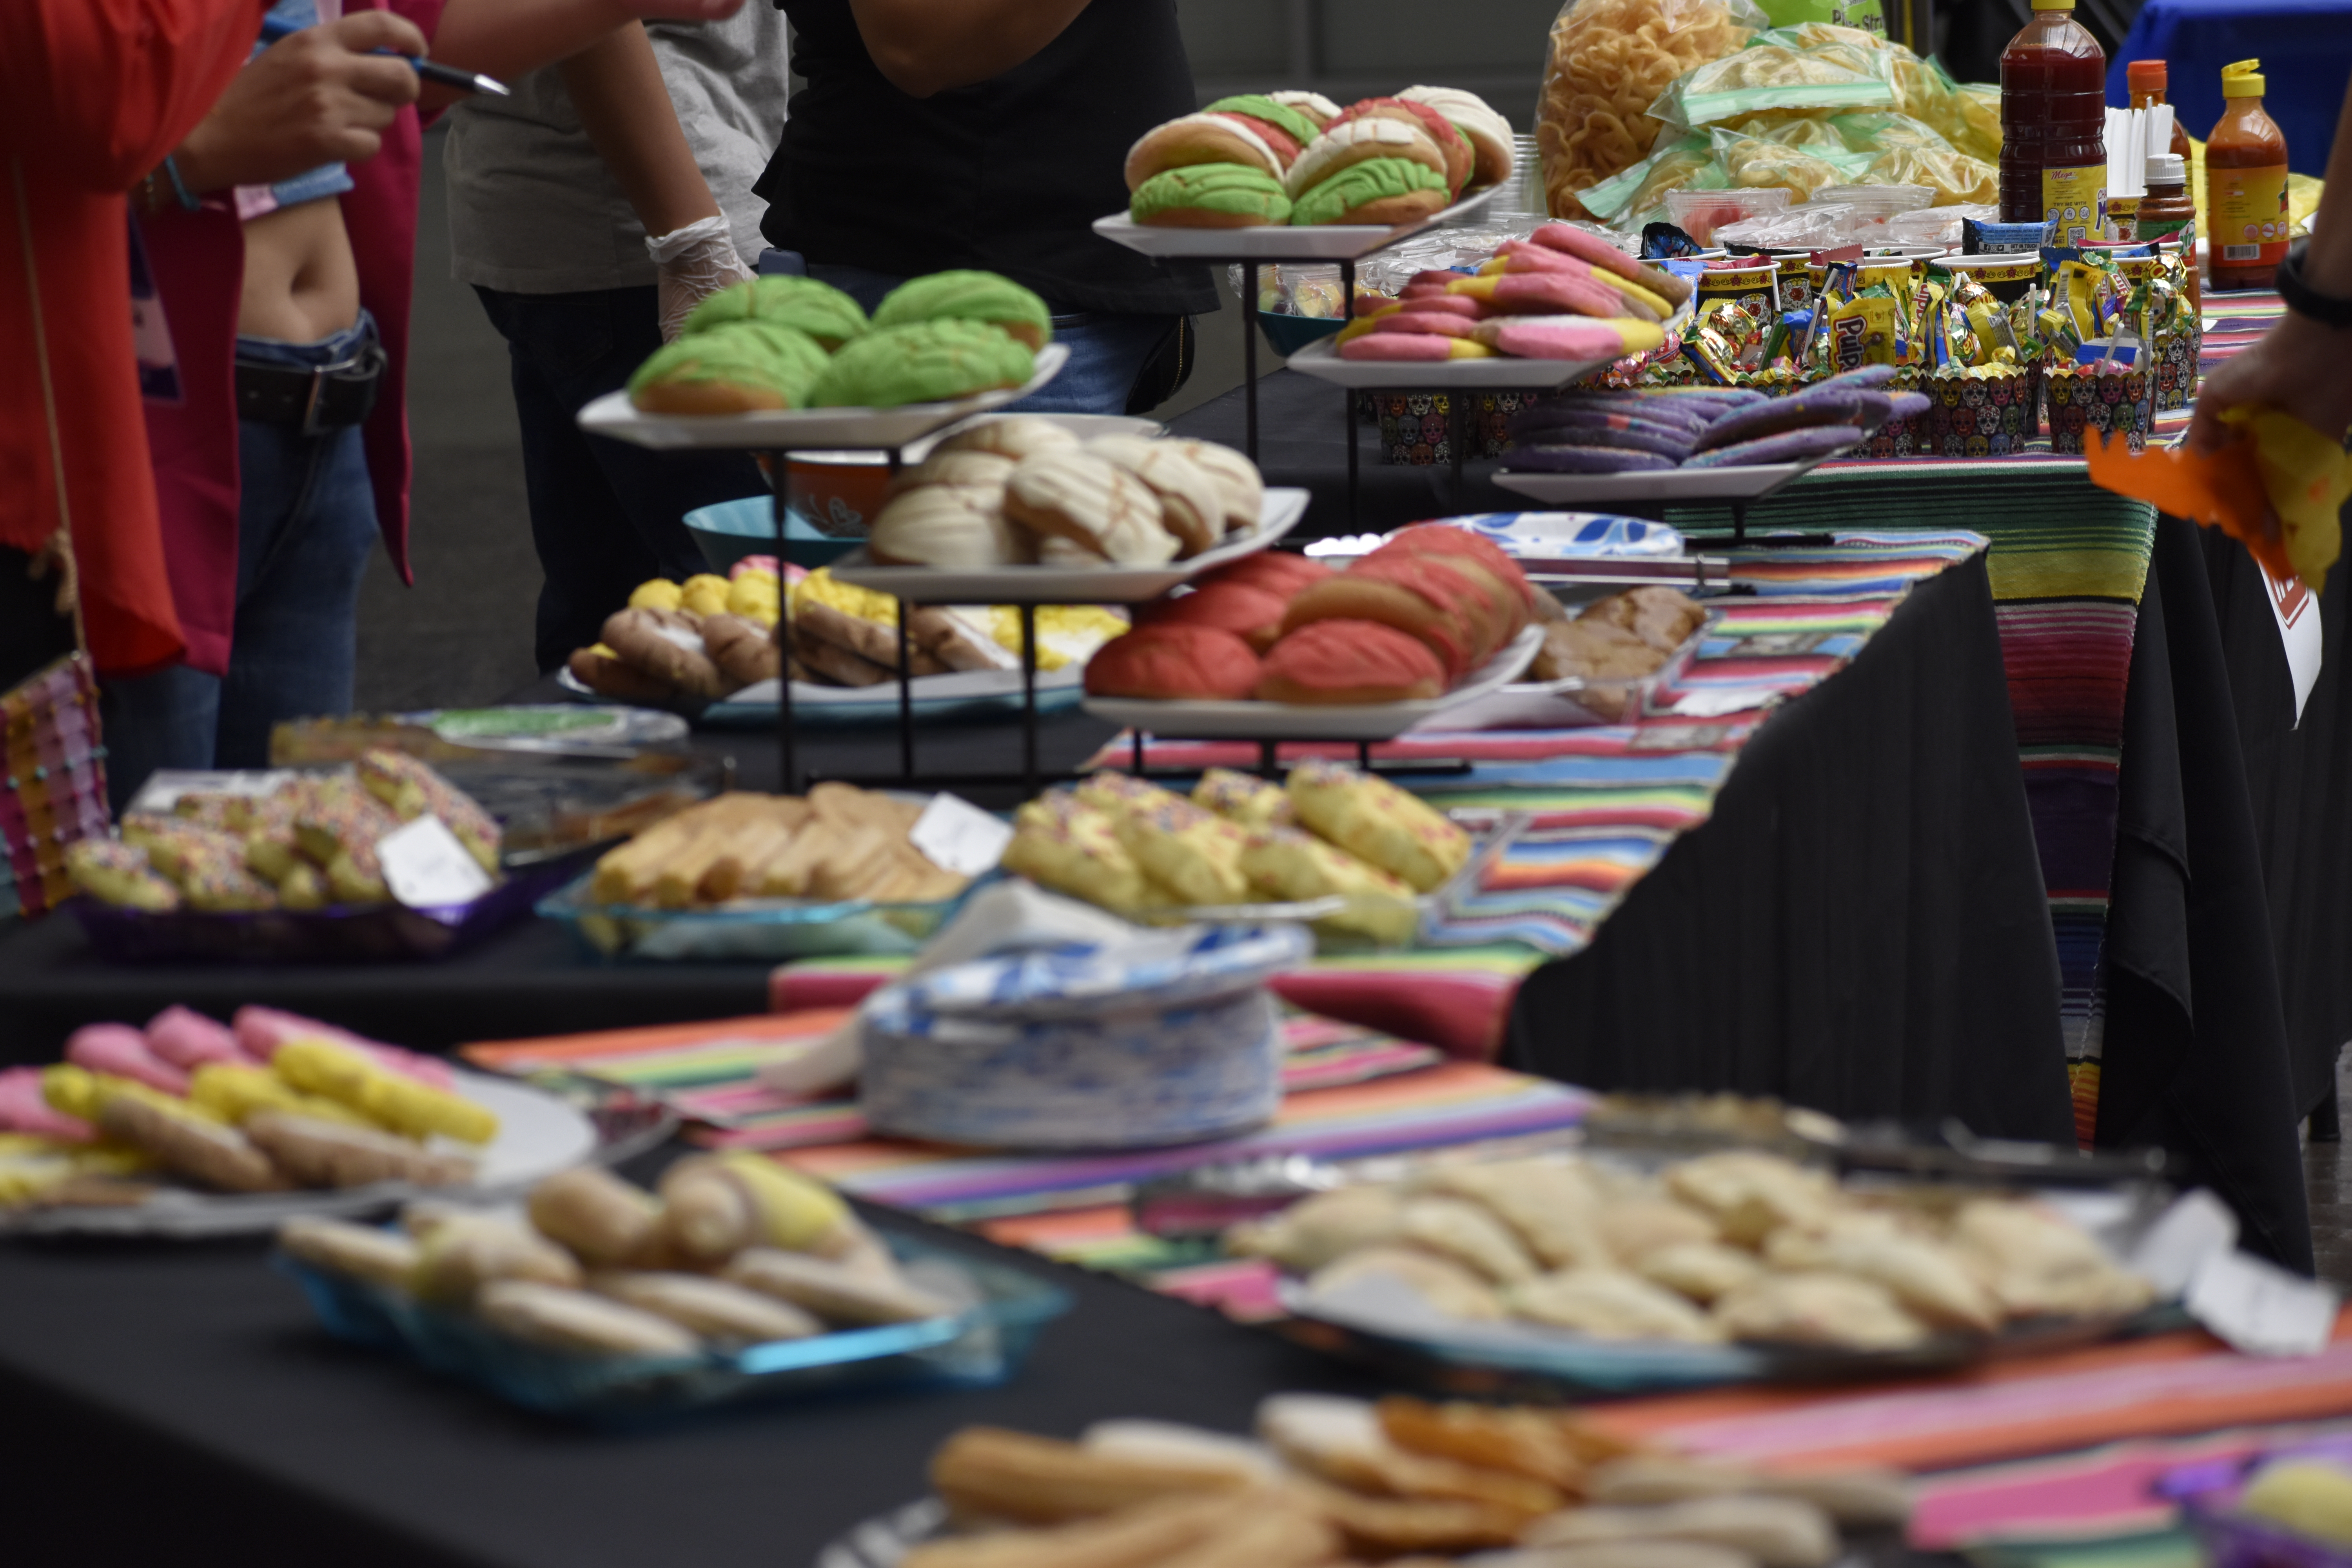 Many tables filled to the brim with many Hispanic desserts and treats.